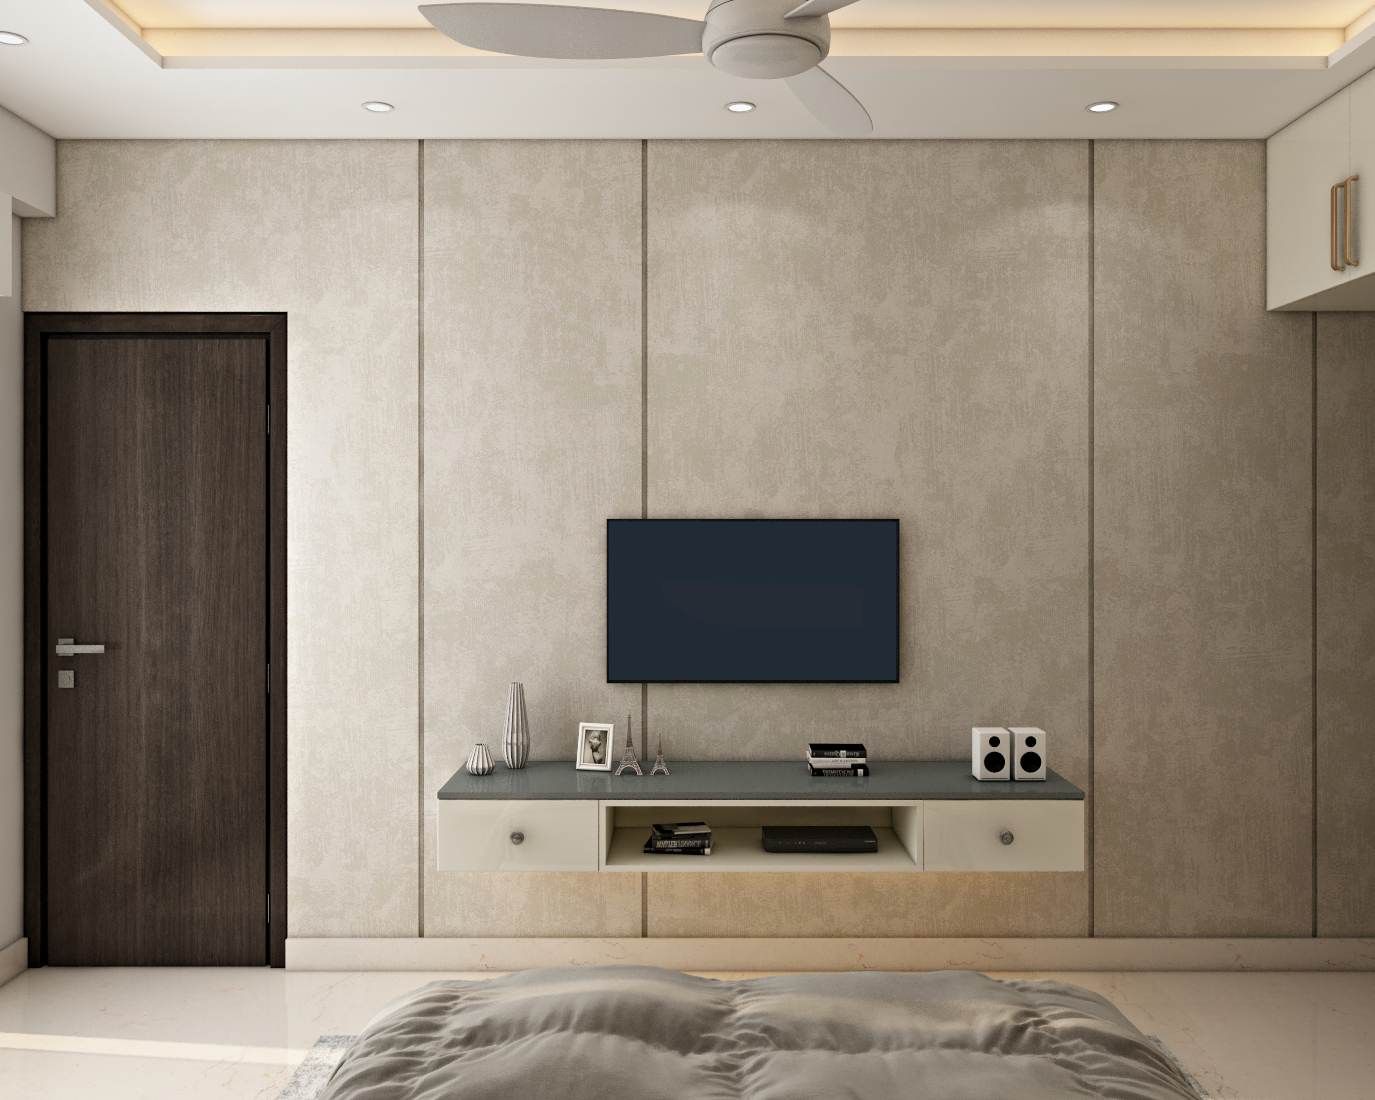 Minimal TV Unit Design With Wall-Mounted Storage